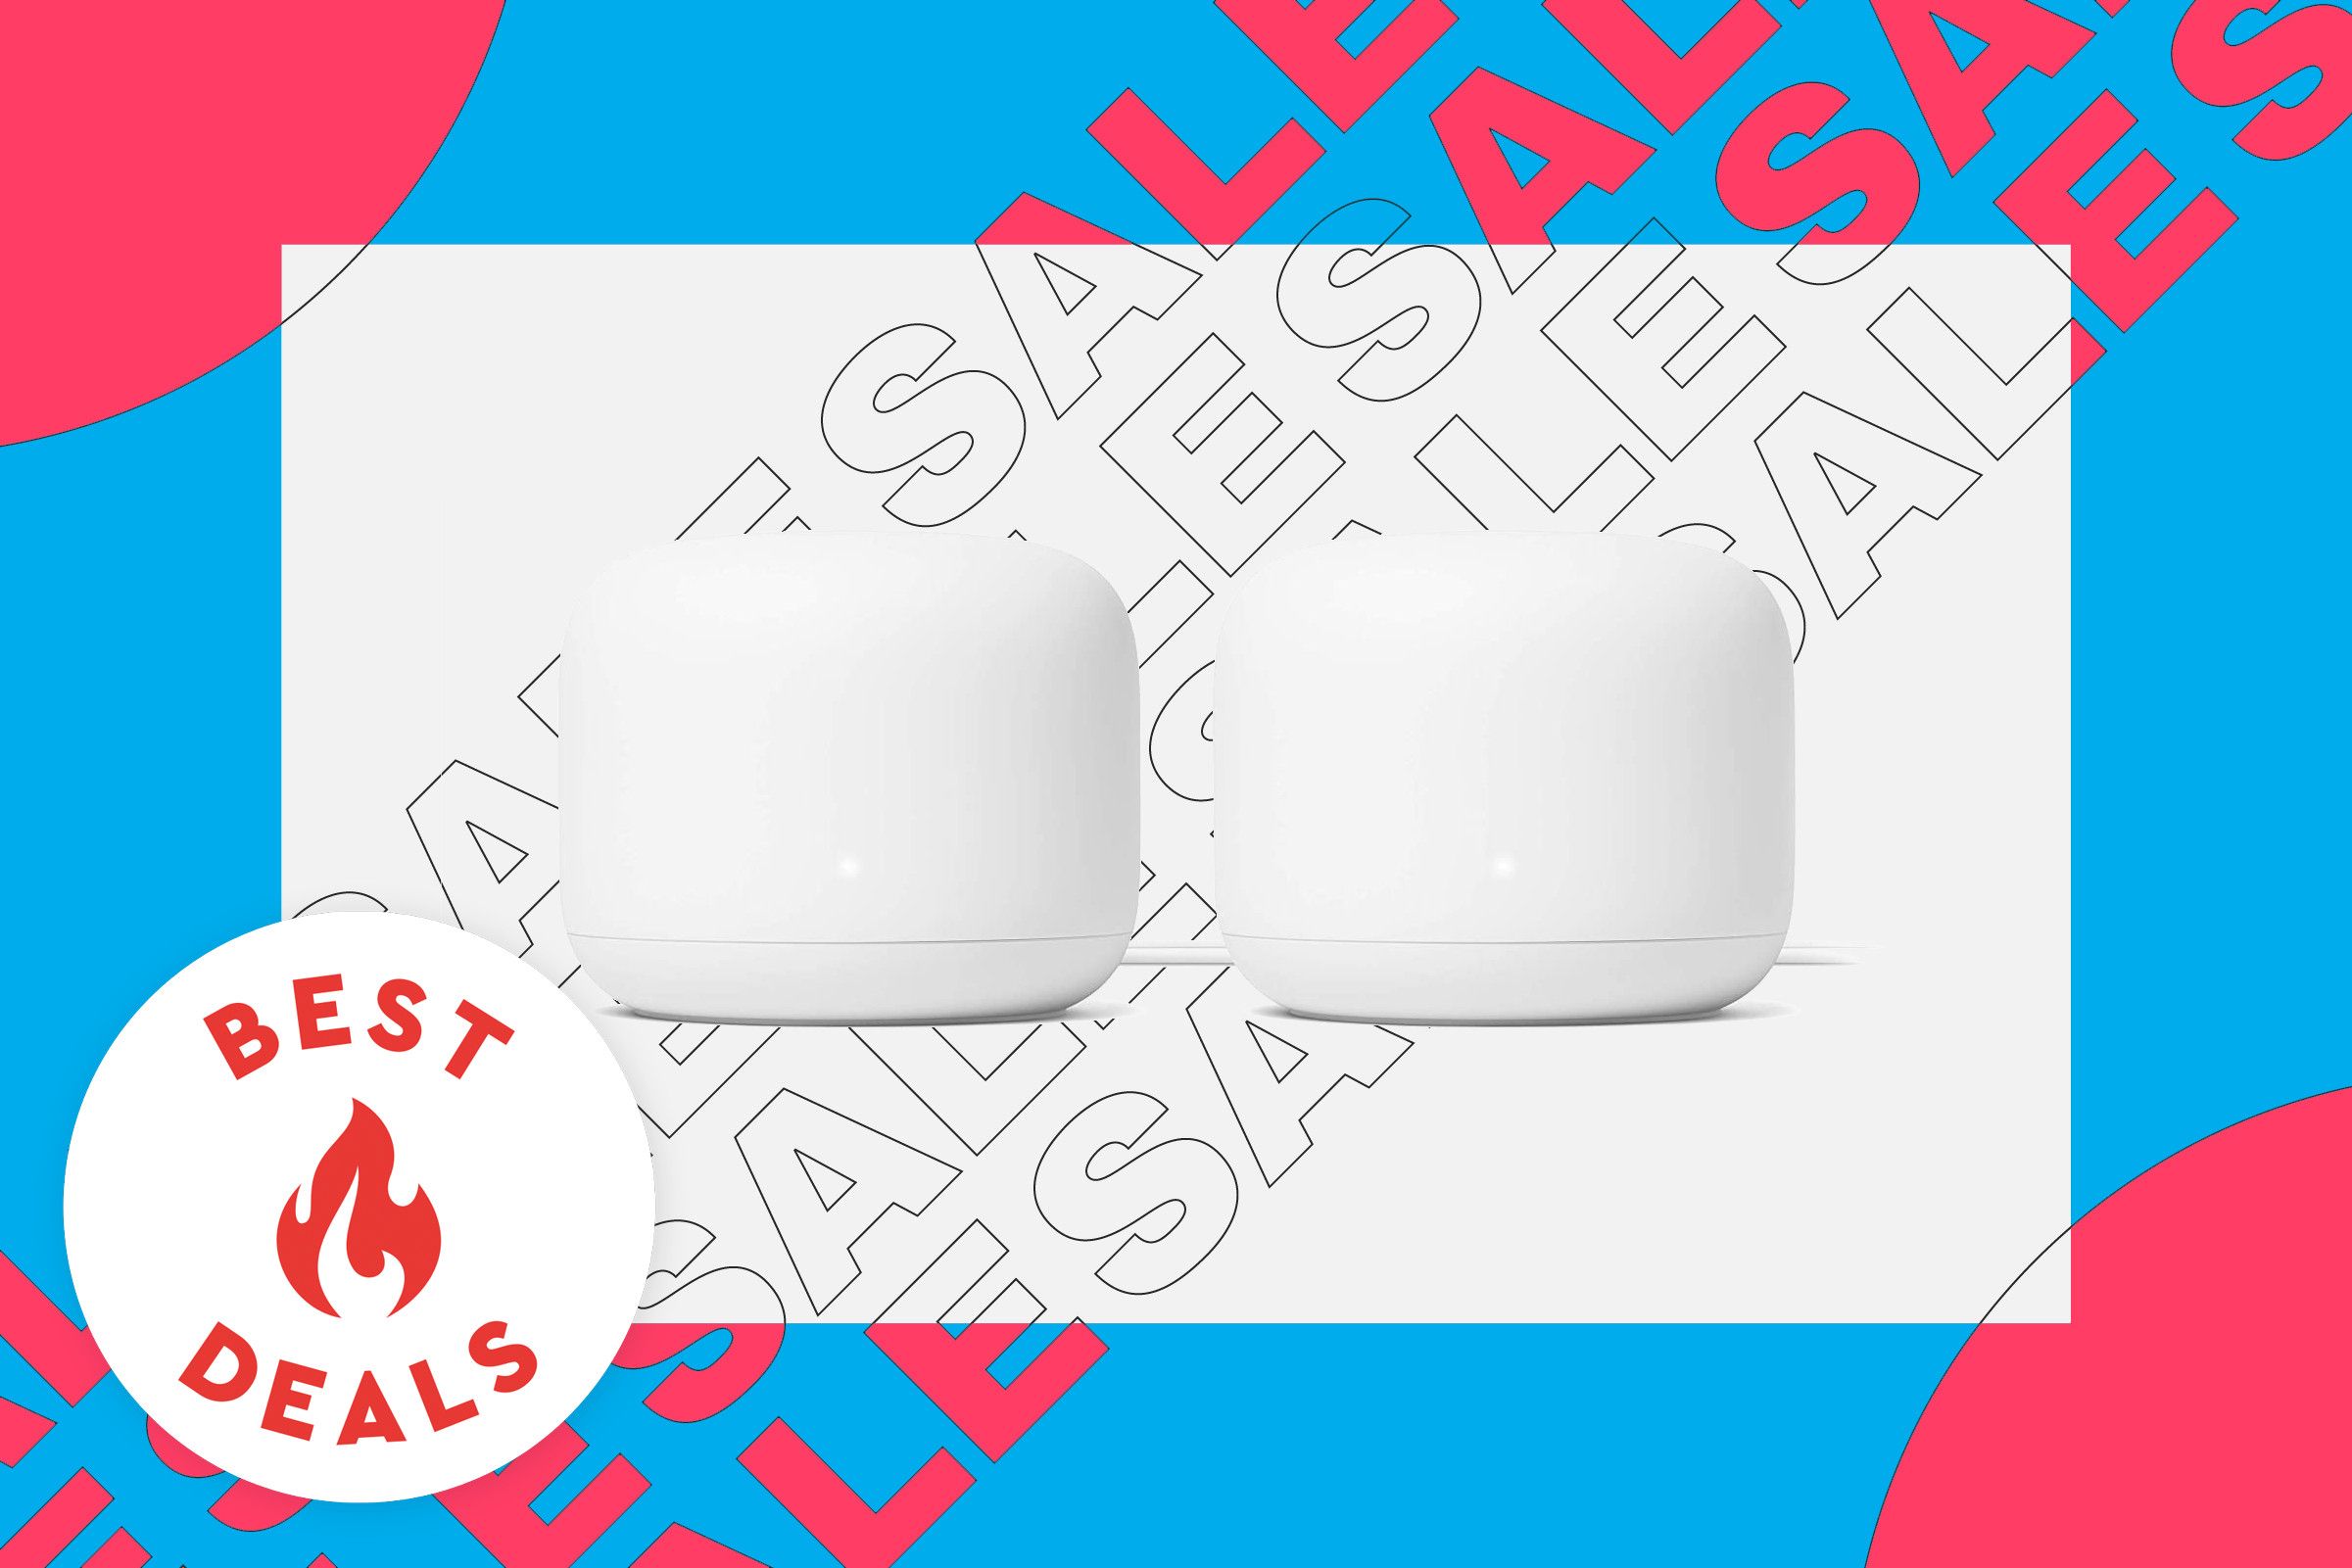 Get 2 Google Nest Wi-Fi routers for less than the cost of 1 for Cyber Monday